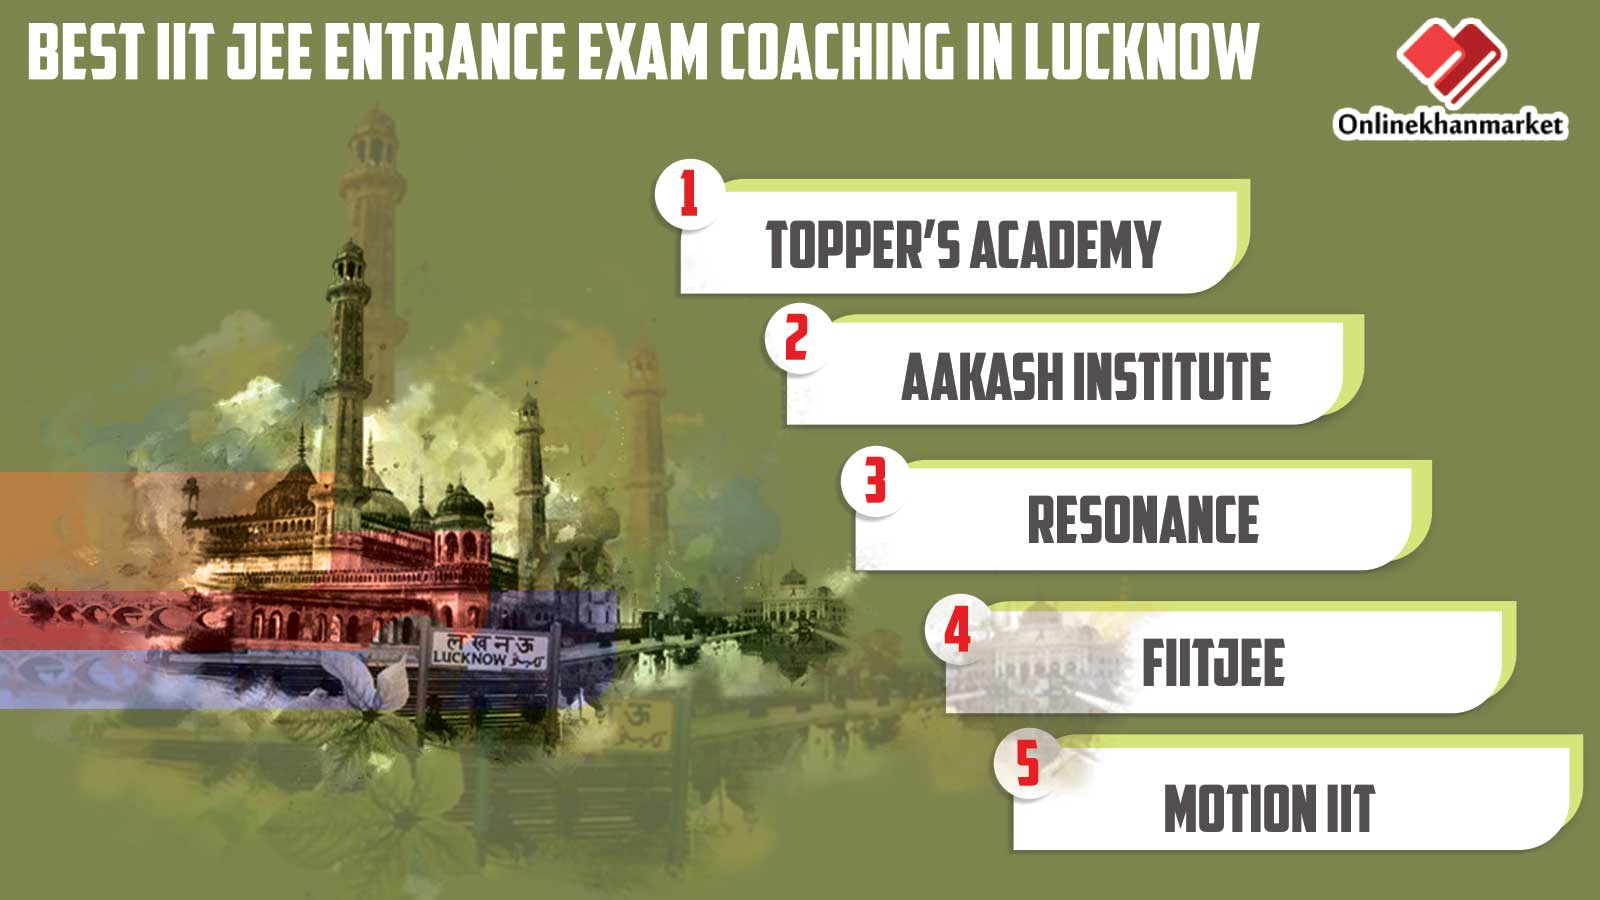 Top IIT JEE Coaching in Lucknow 